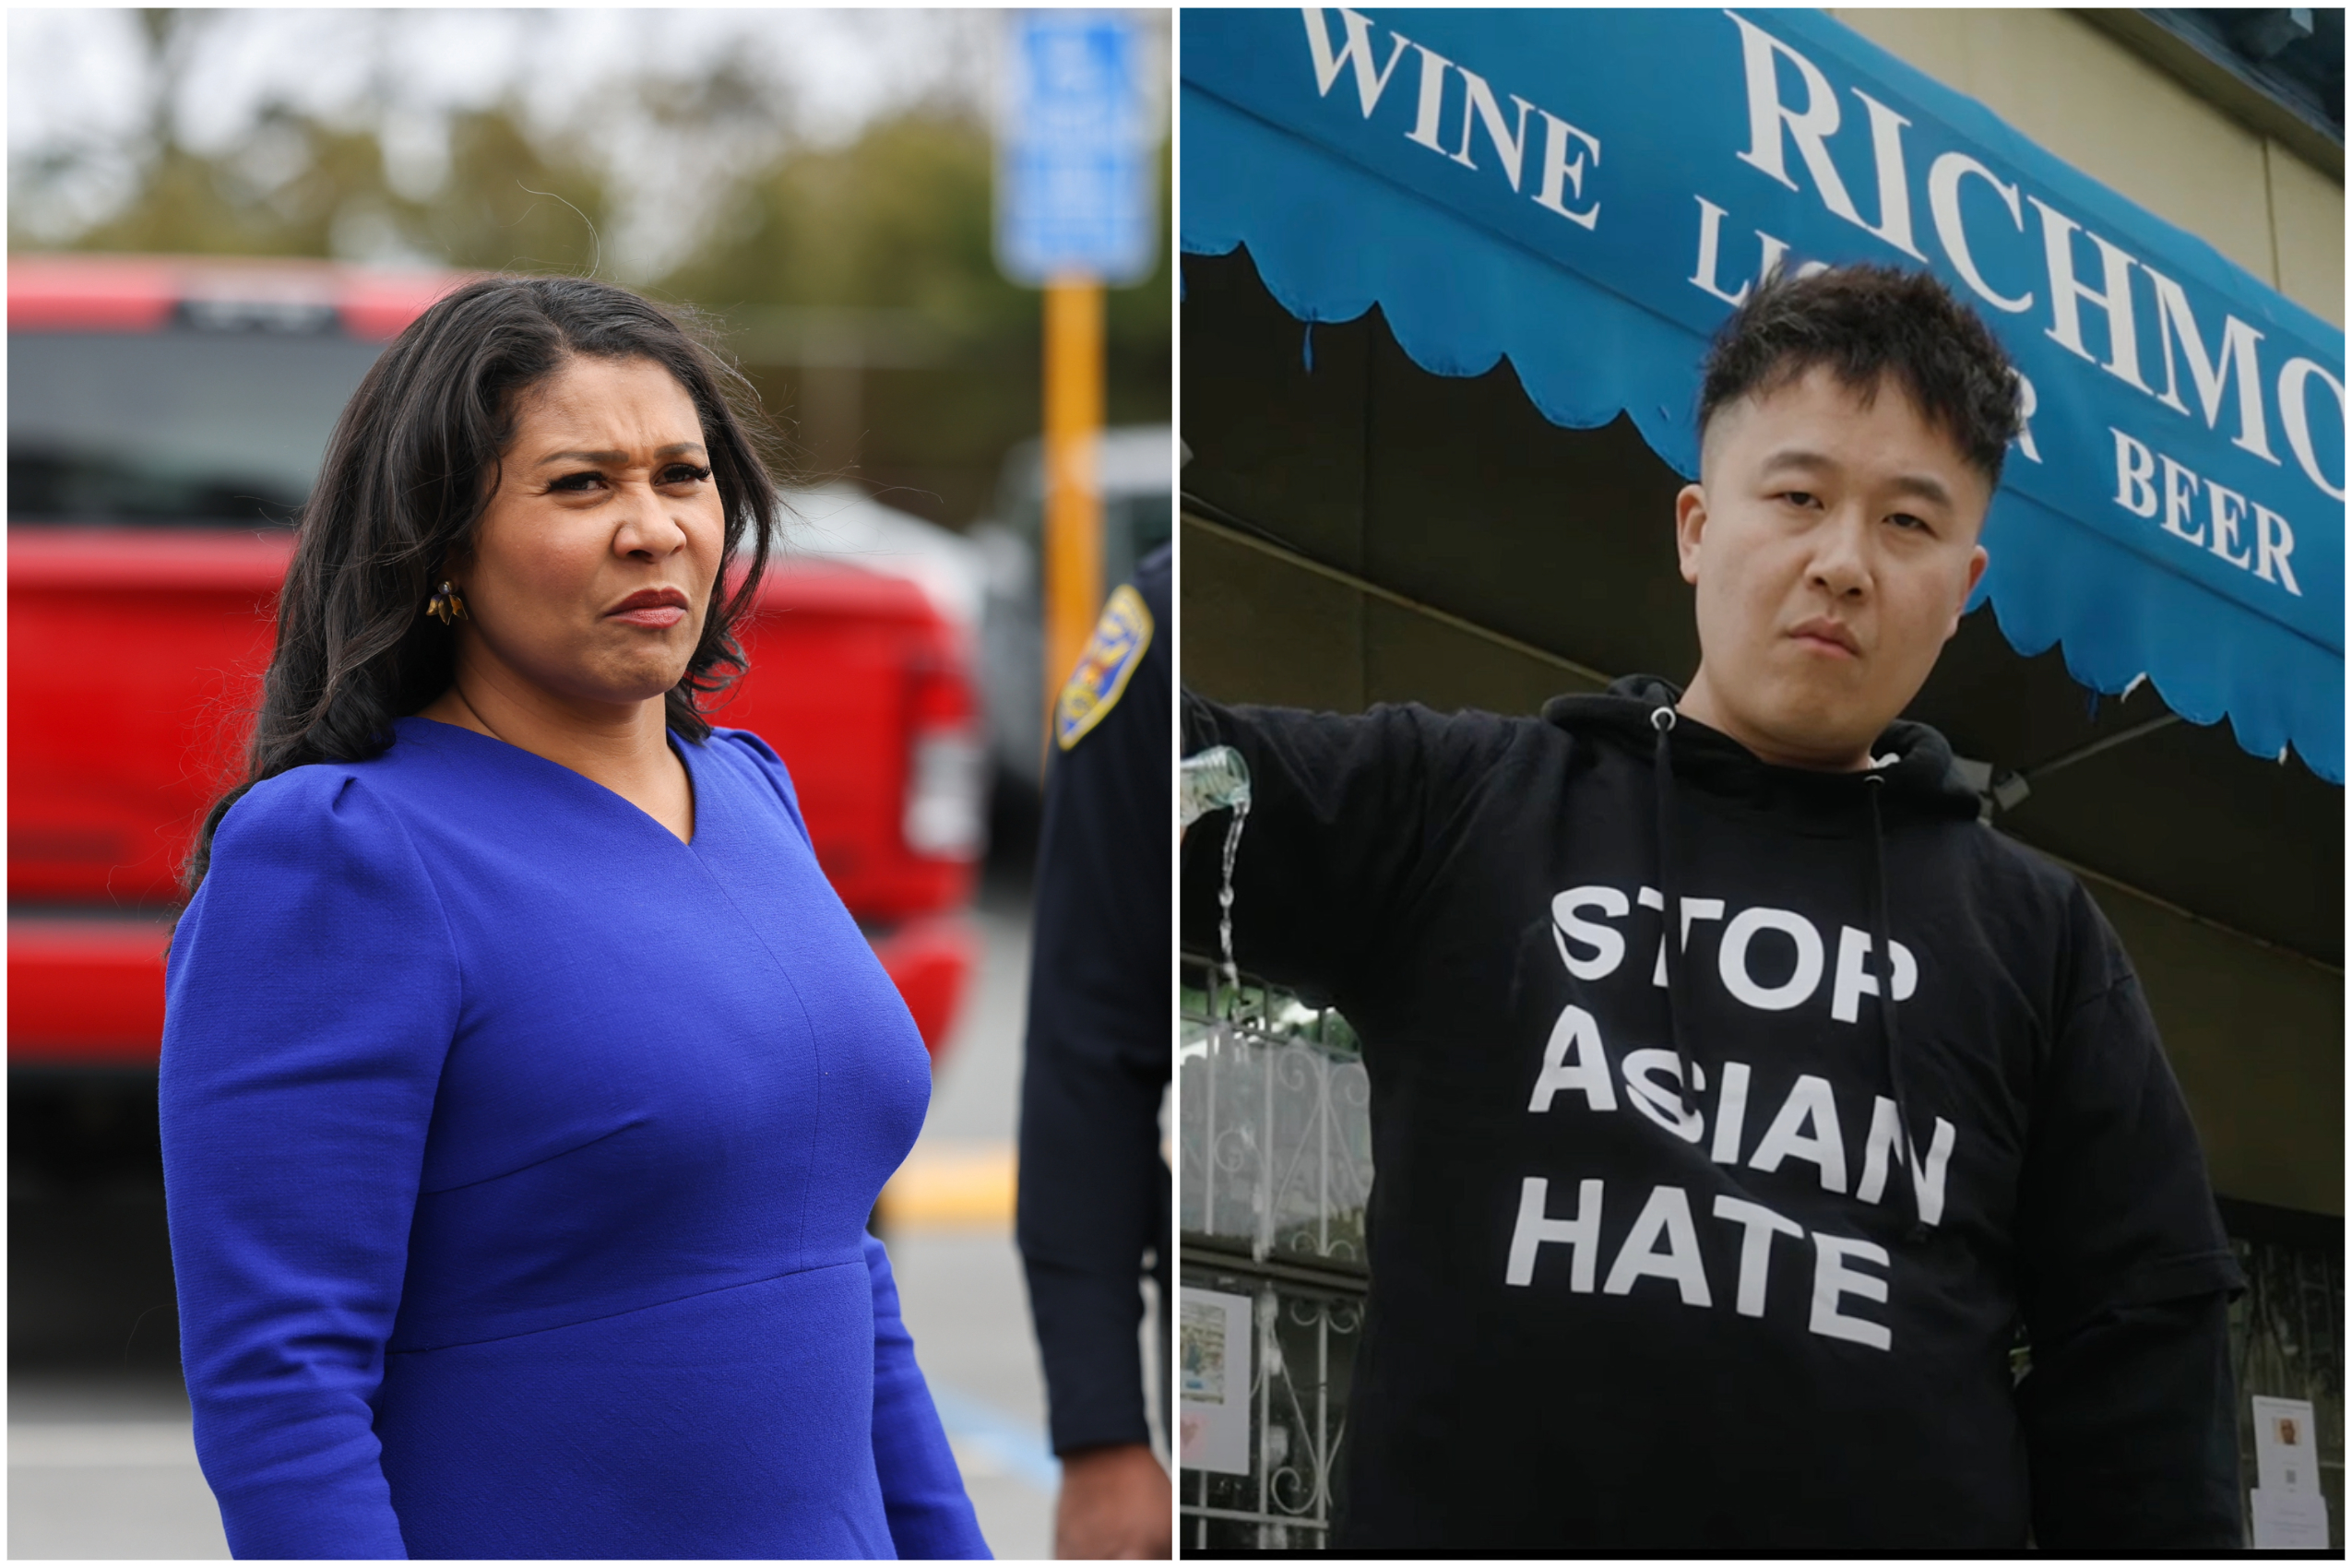 A composite image of Mayor London Breed, right, and San Francisco restaurant owner and rapper Chino Yang, right.